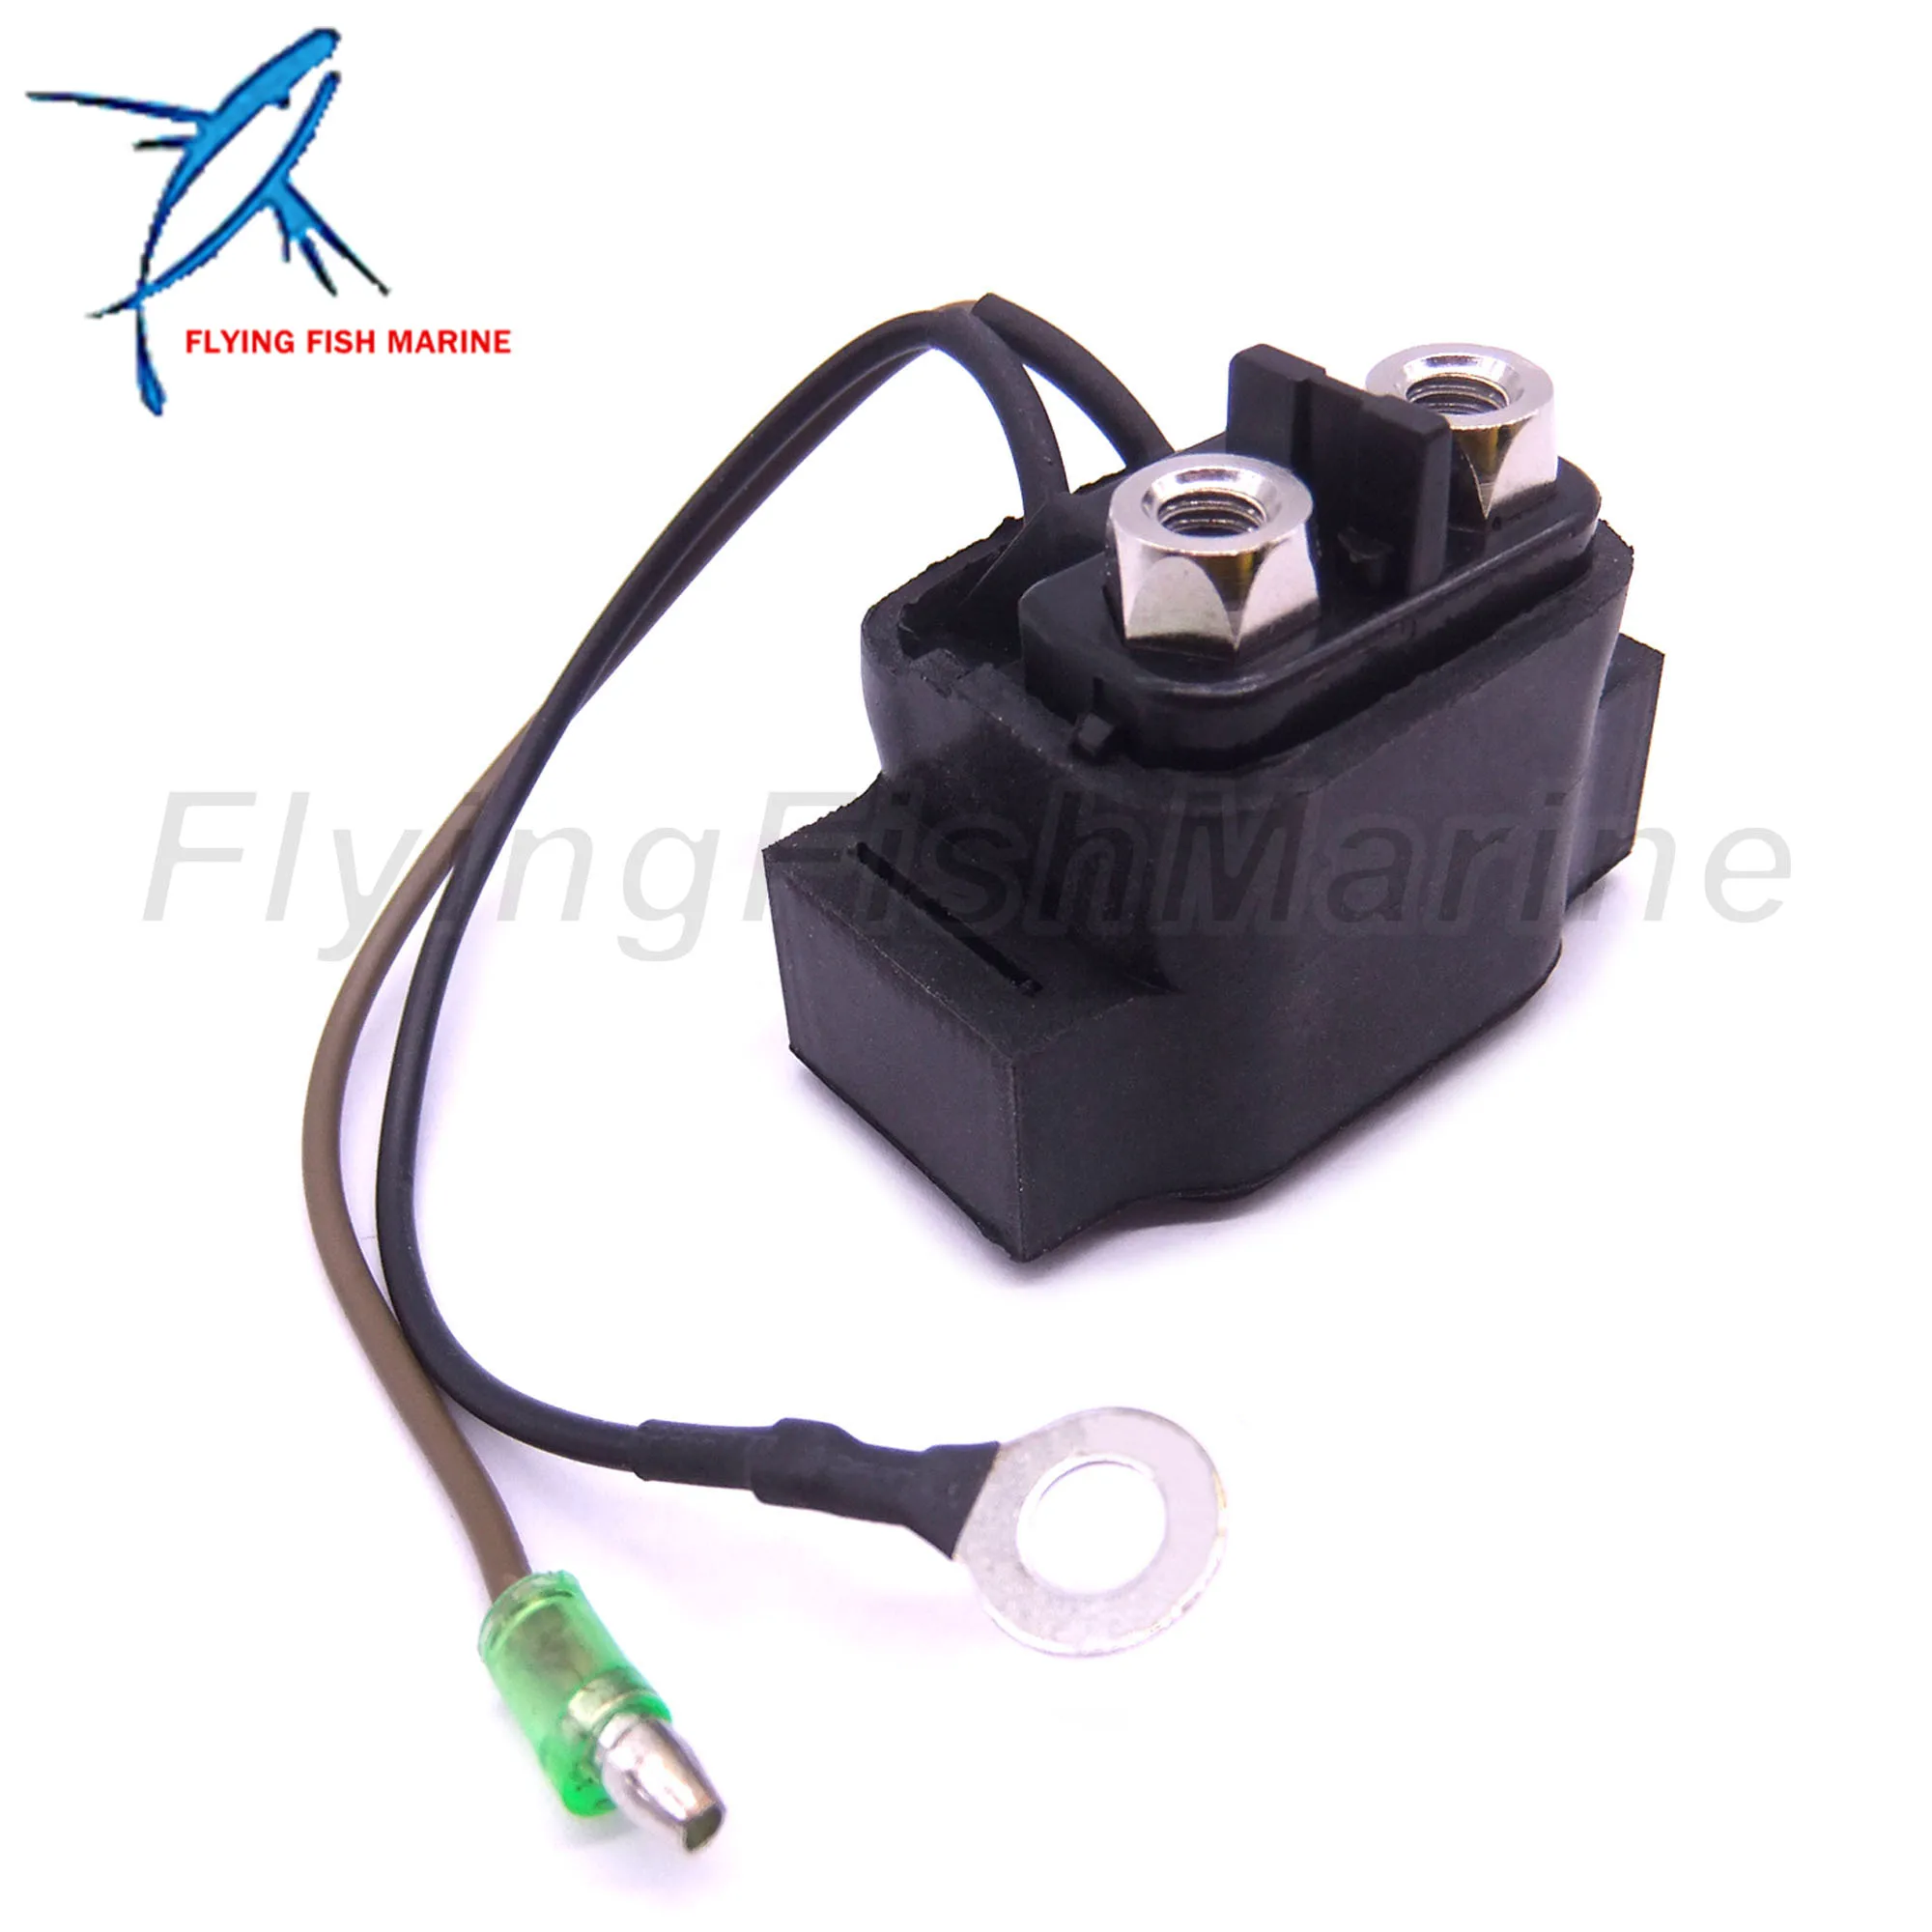 853809001 881352T 8M0098898 Solenoid/Relay for Mercury Outboard Engine 8HP-30HP 